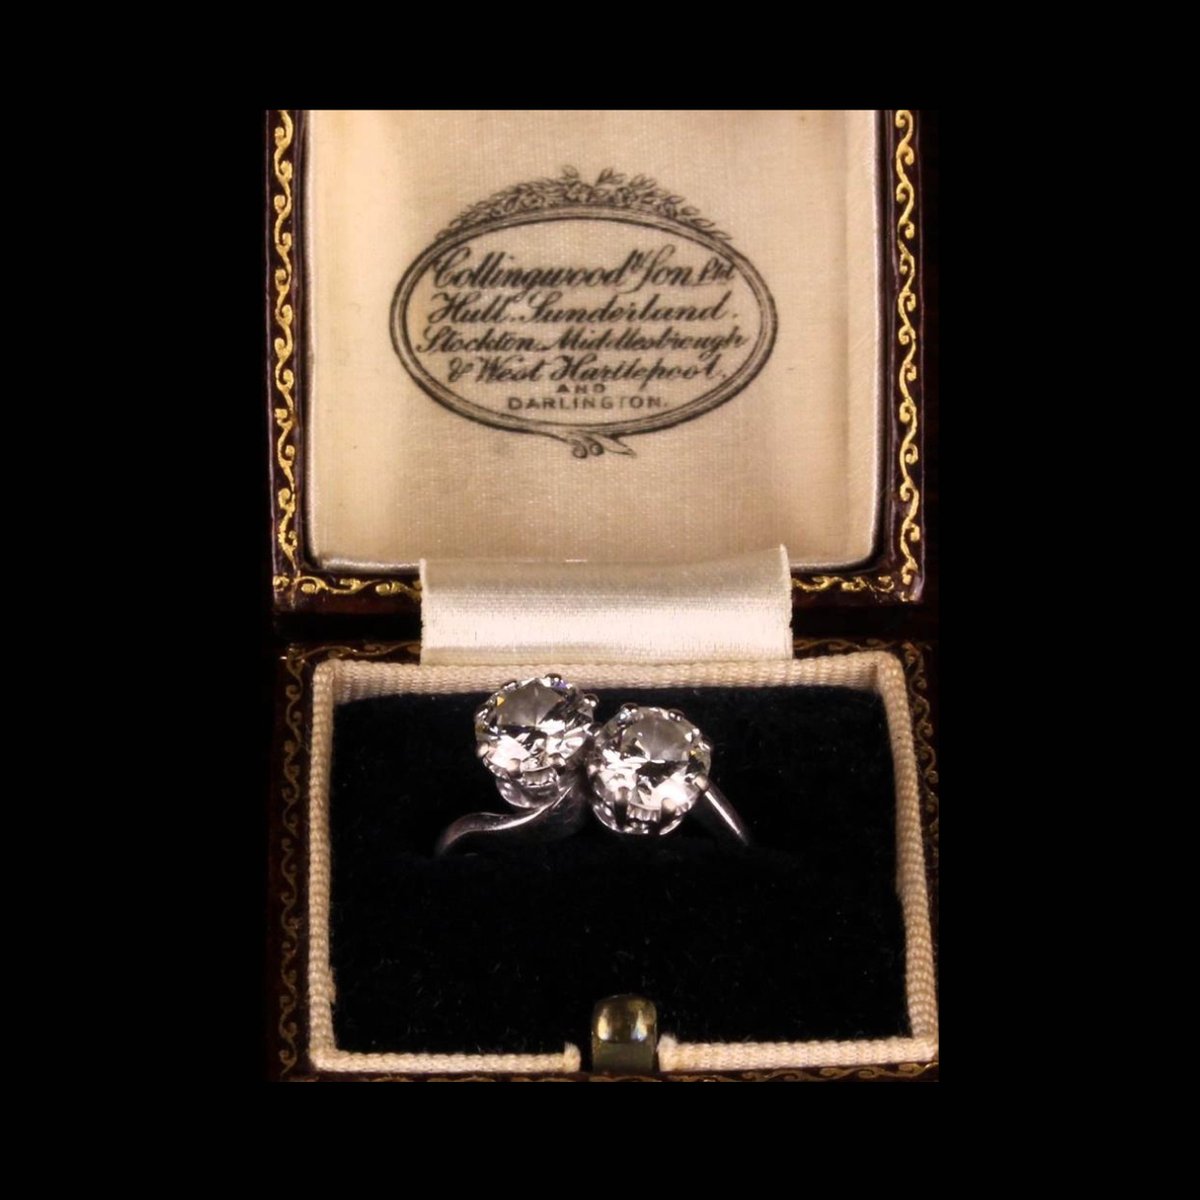 Did you get your hands on this lovely example? A Fine 18 Carat White Gold & Diamond Ring. Hammer $4,800. #auction #onlineauction #auctionhouse #auctioneer #vintage #auctioneers #bid #antiques #antique #auctionswork #collection #sale #finefurniture #furniture